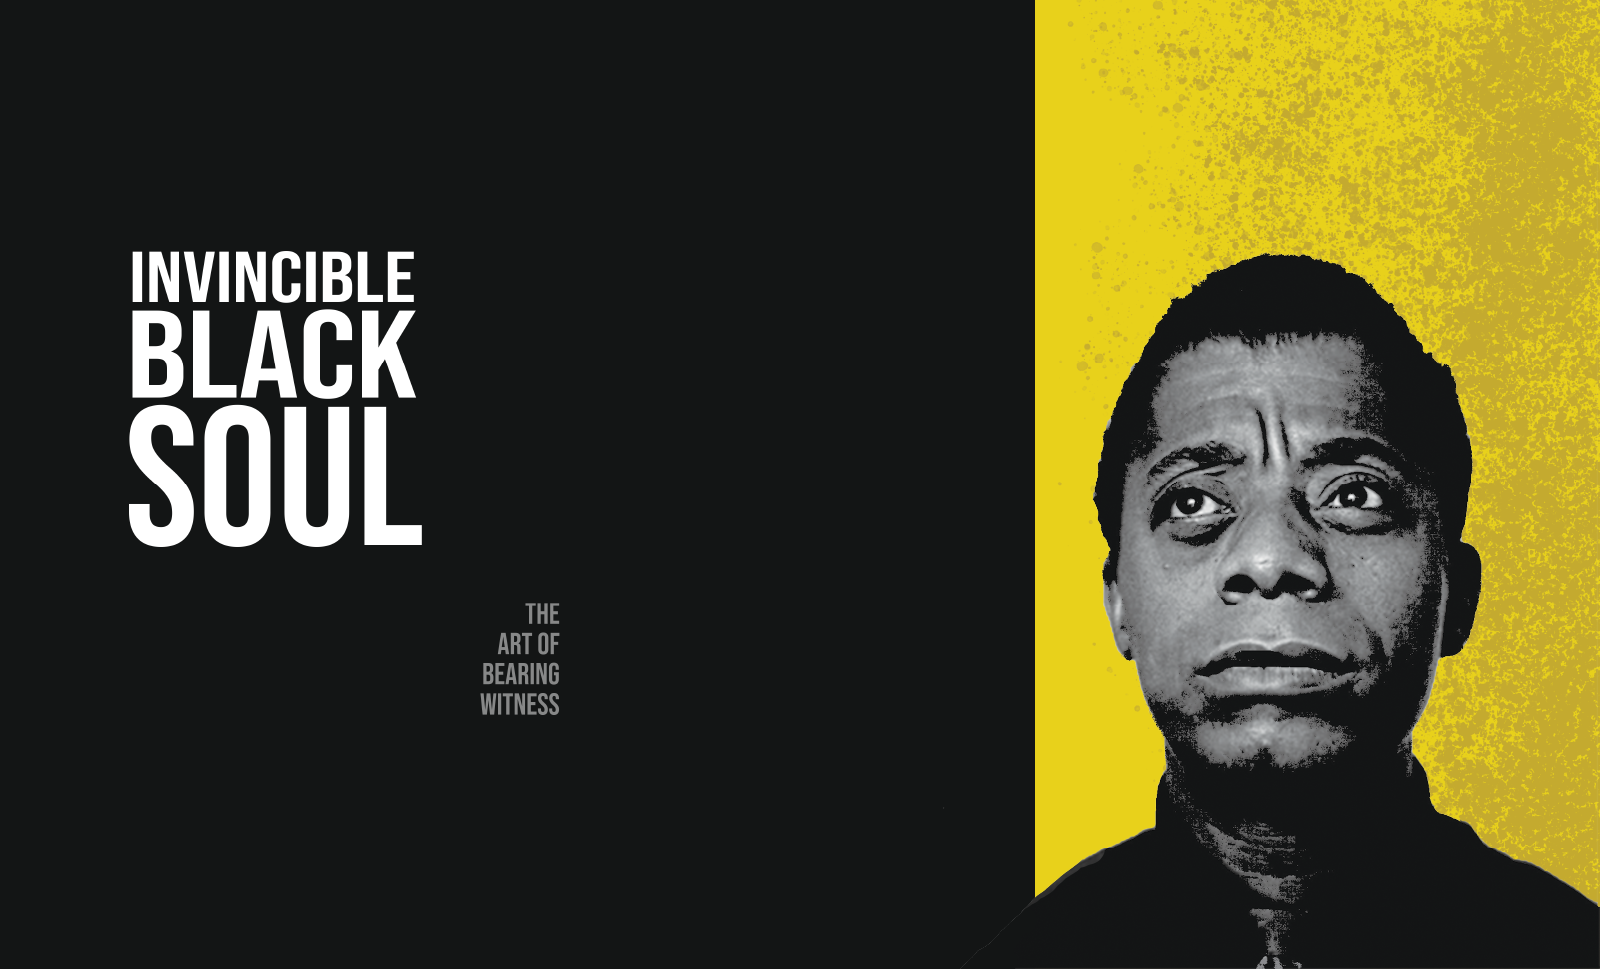 On the right side is a gray-scale portrait of James Baldwin with a textured yellow background. On the left is white text reading "Invincible Black Soul: The Art of Bearing Witness" on a black background